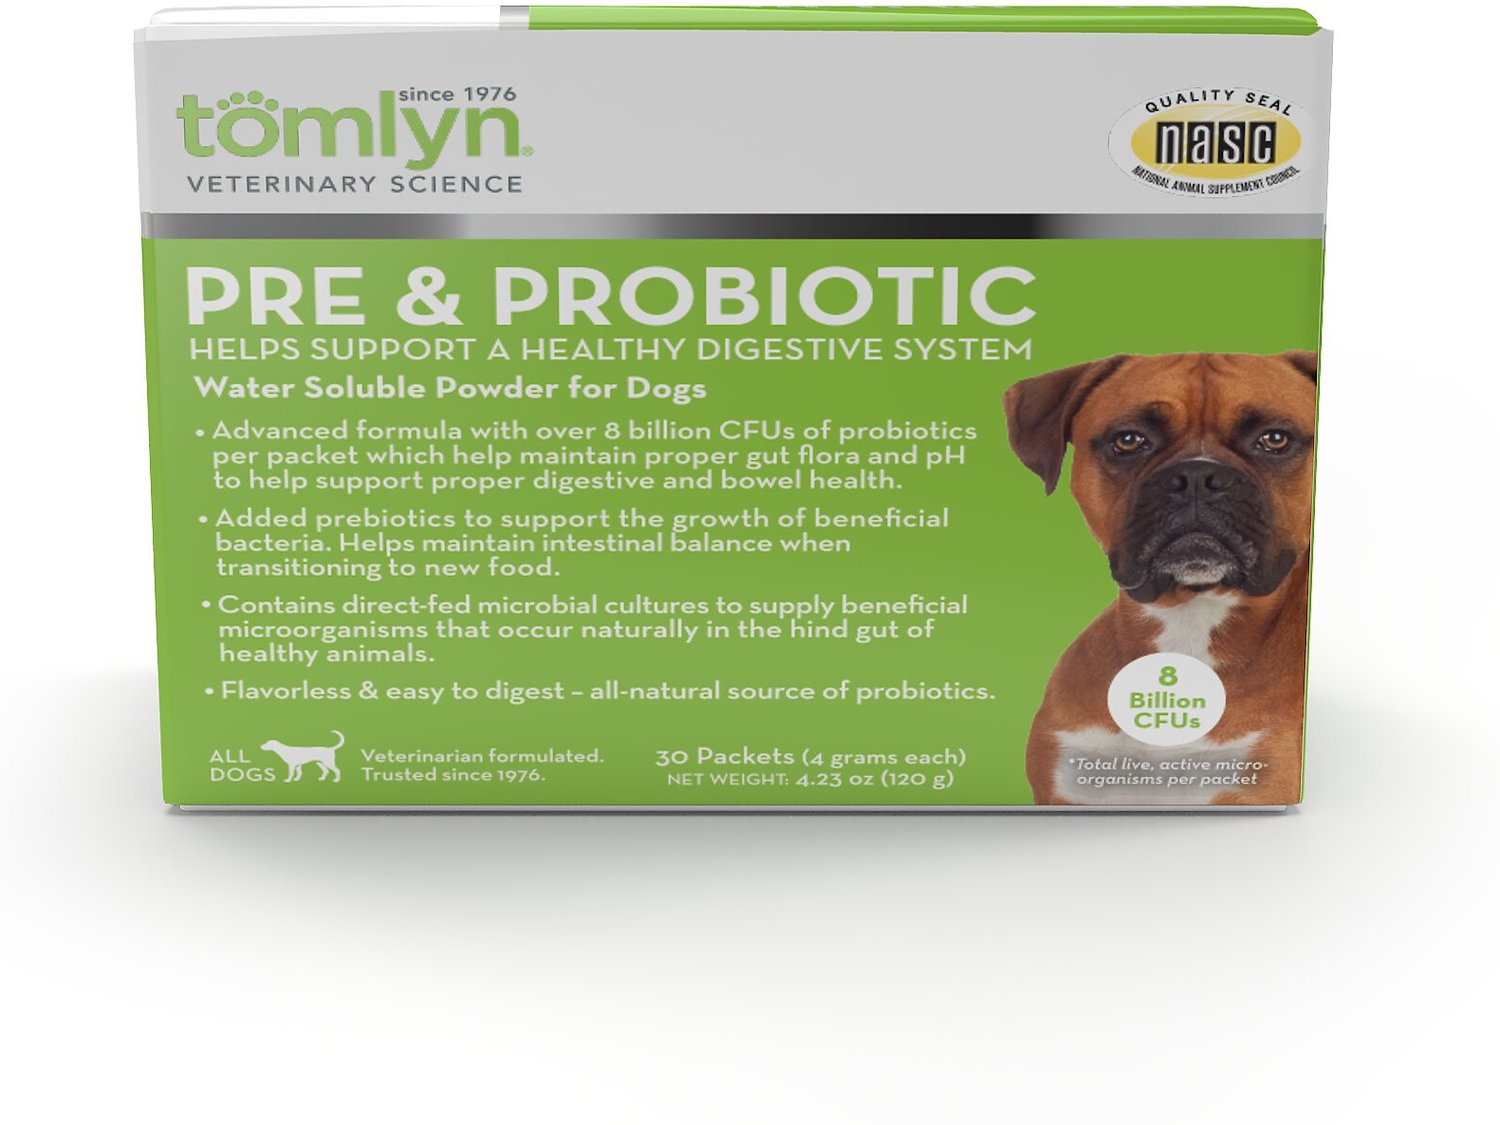 Digestive Enzymes Buddy&Max Probiotic Chews for Dogs Diarrhea Contains Prebiotics Stomach Allergy Relief Gas Dog Probiotics Supplement Weight Support Vomit 60 Chews